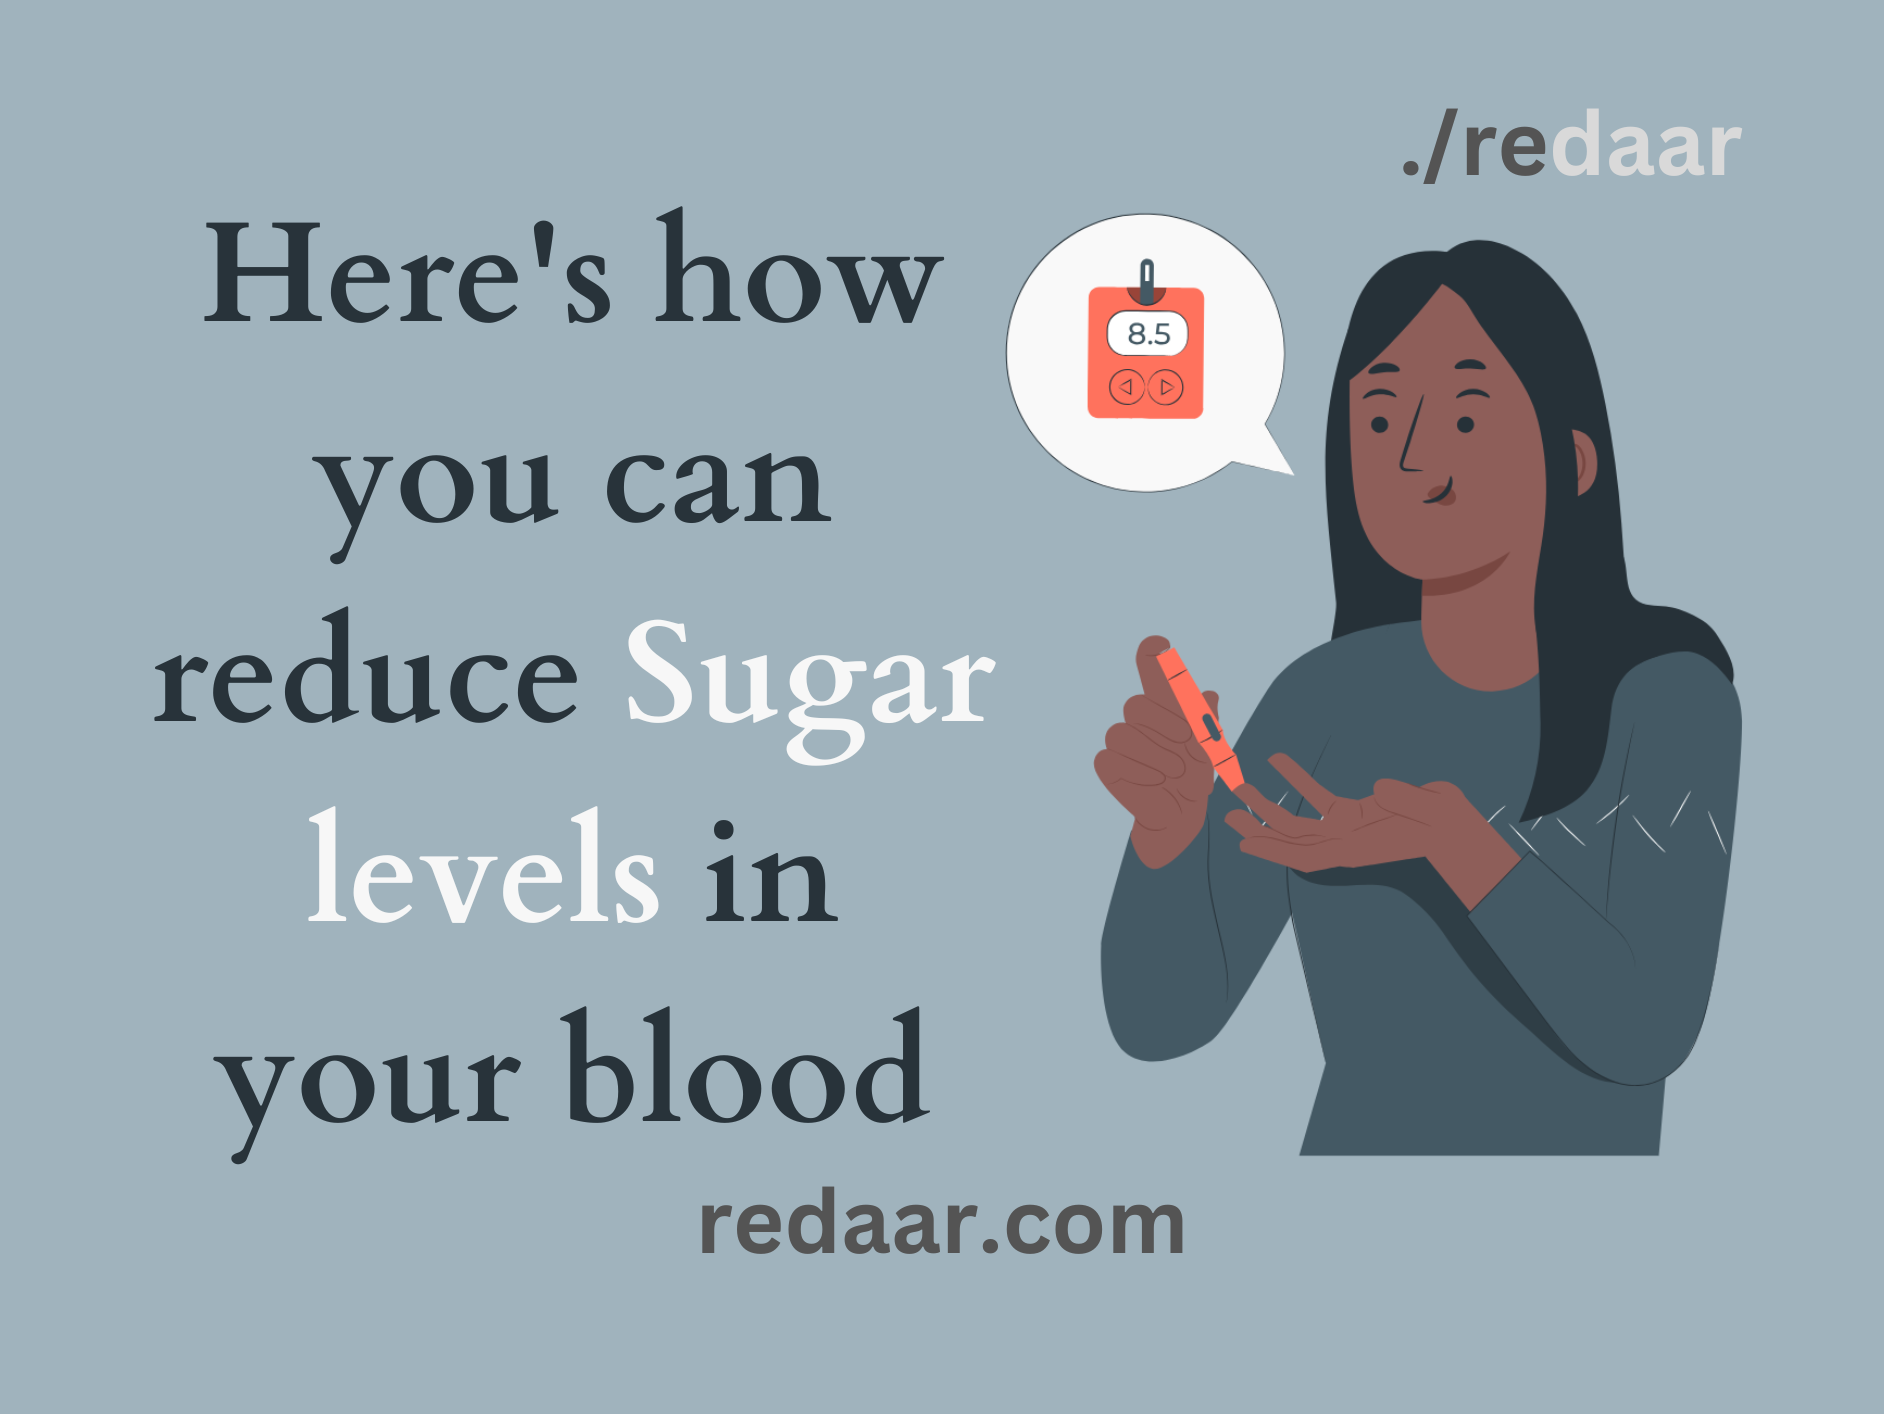 Reduce sugar levels in blood by following these tips